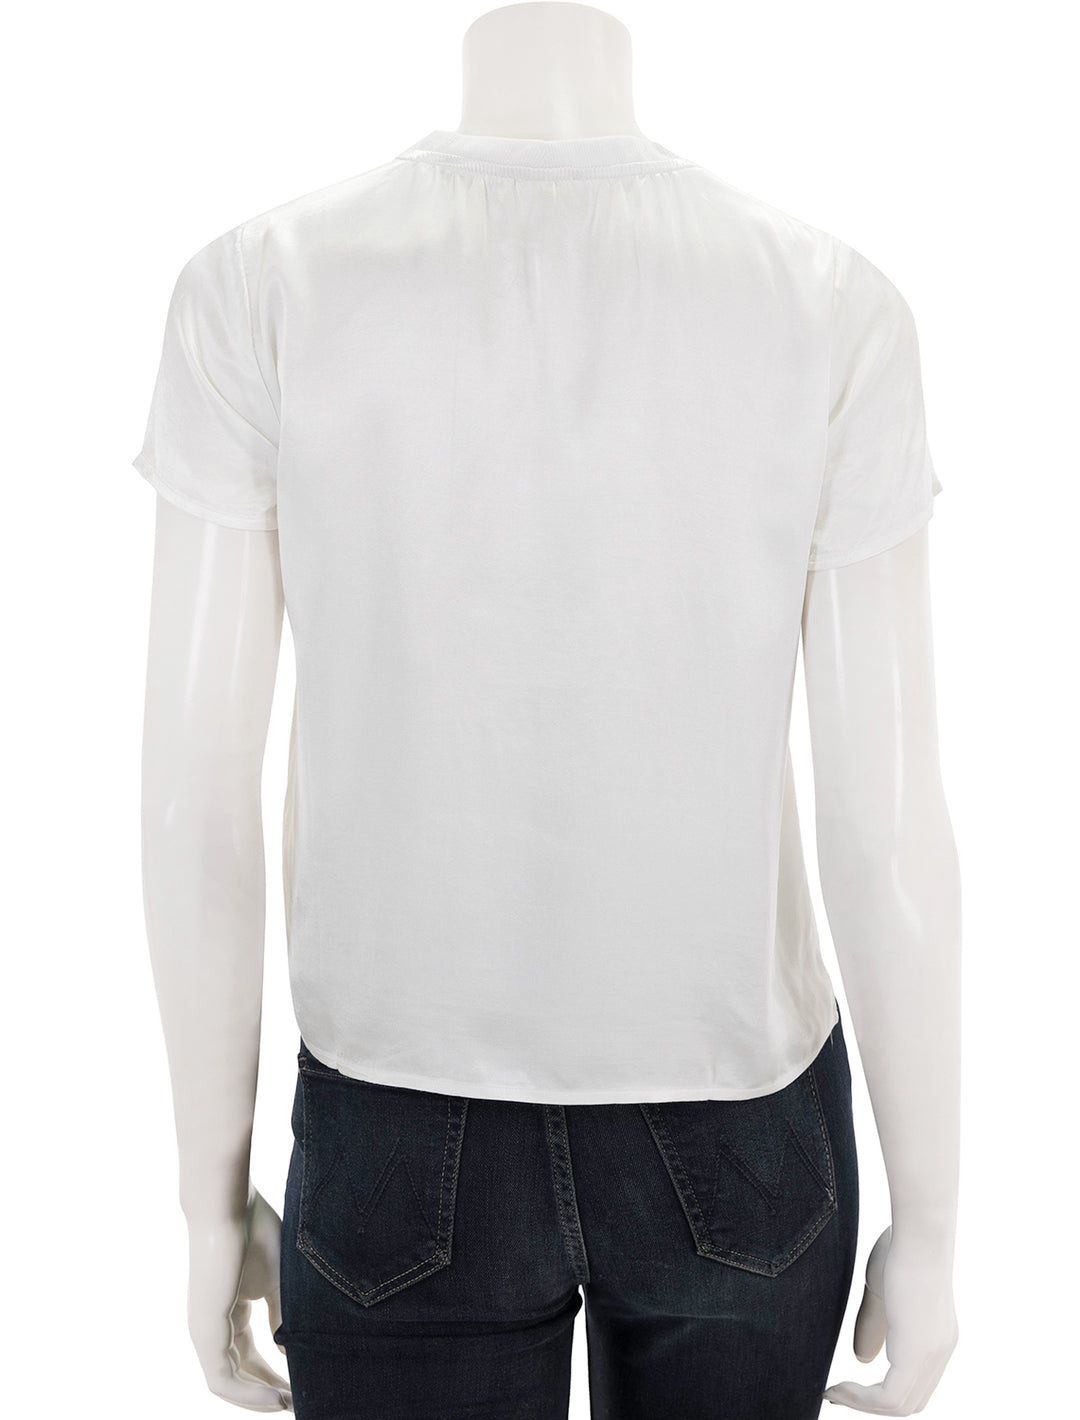 Back view of Nation LTD's marie top in white sateen.